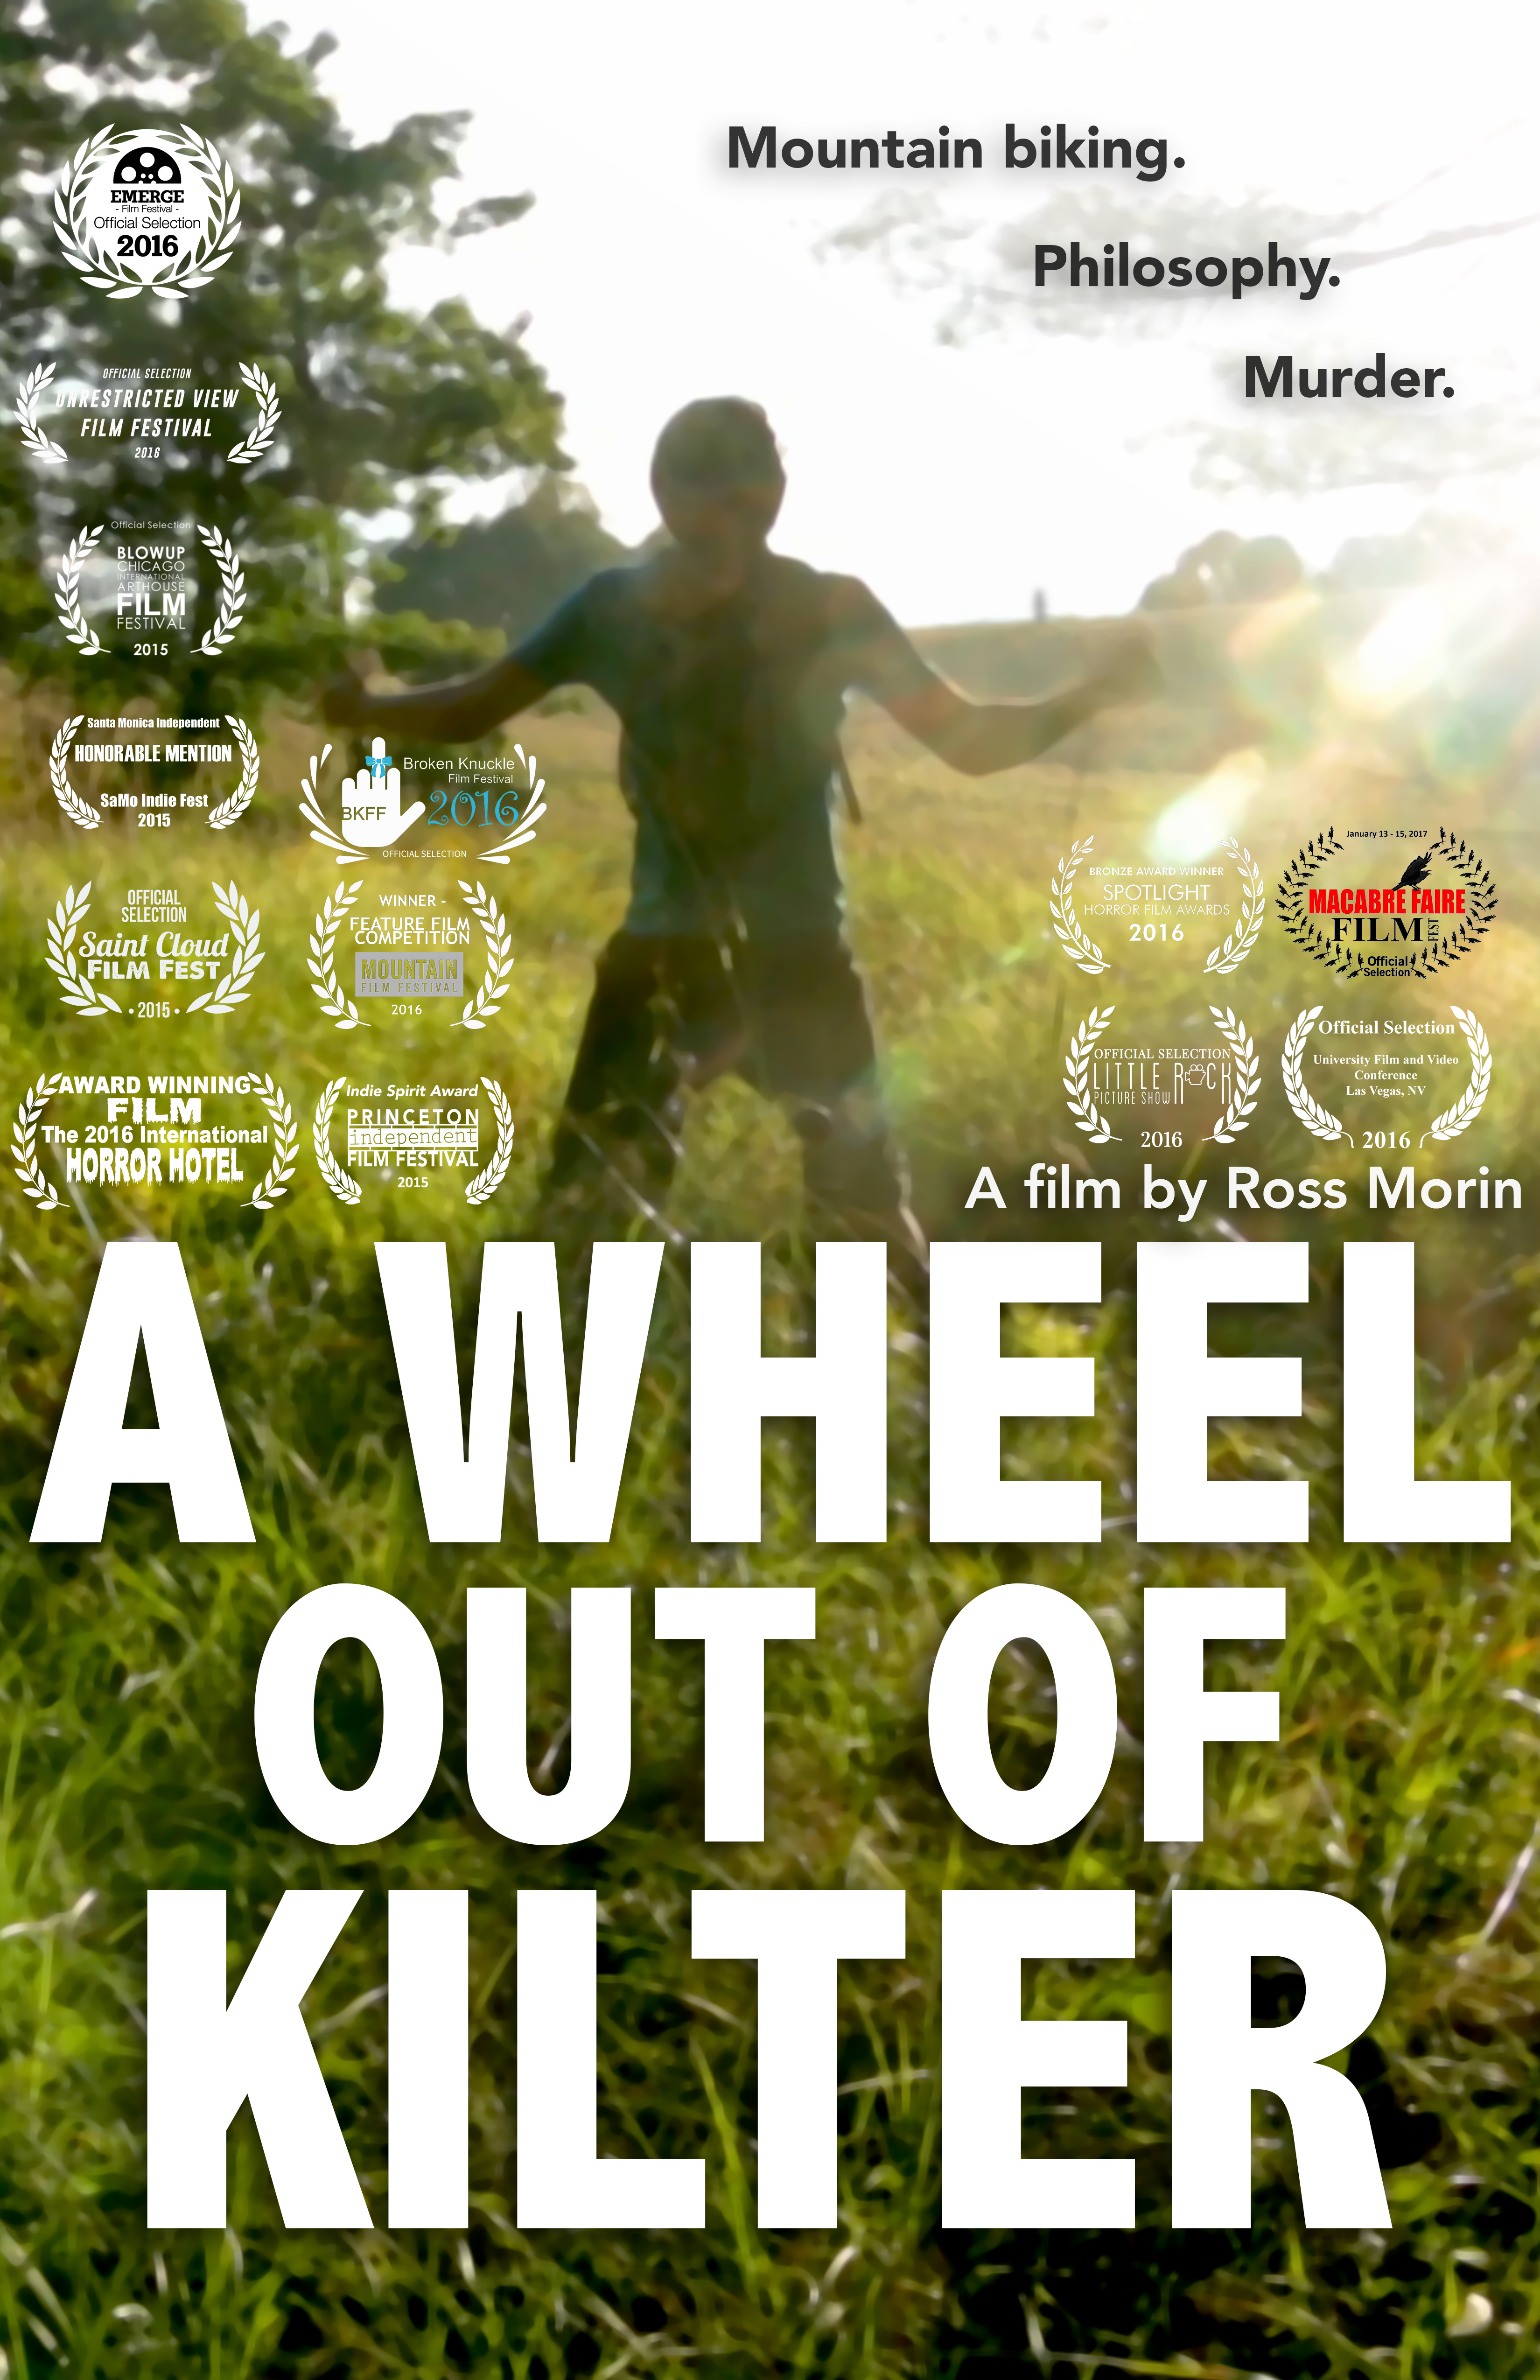 Poster for Ross Morin's film, A Wheel out of Kilter